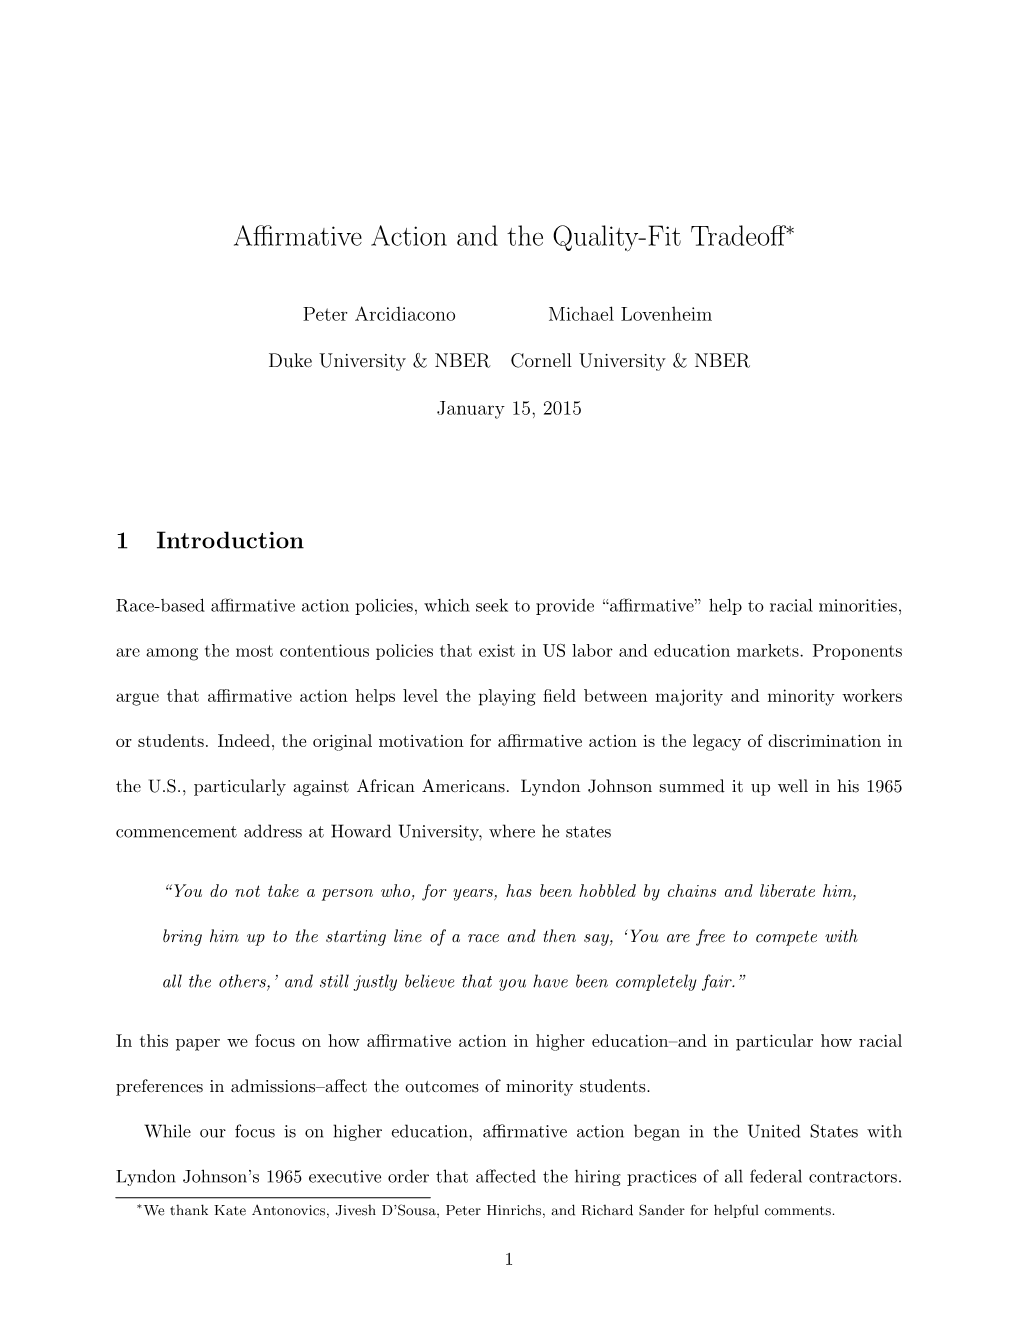 Affirmative Action and the Quality-Fit Tradeoff